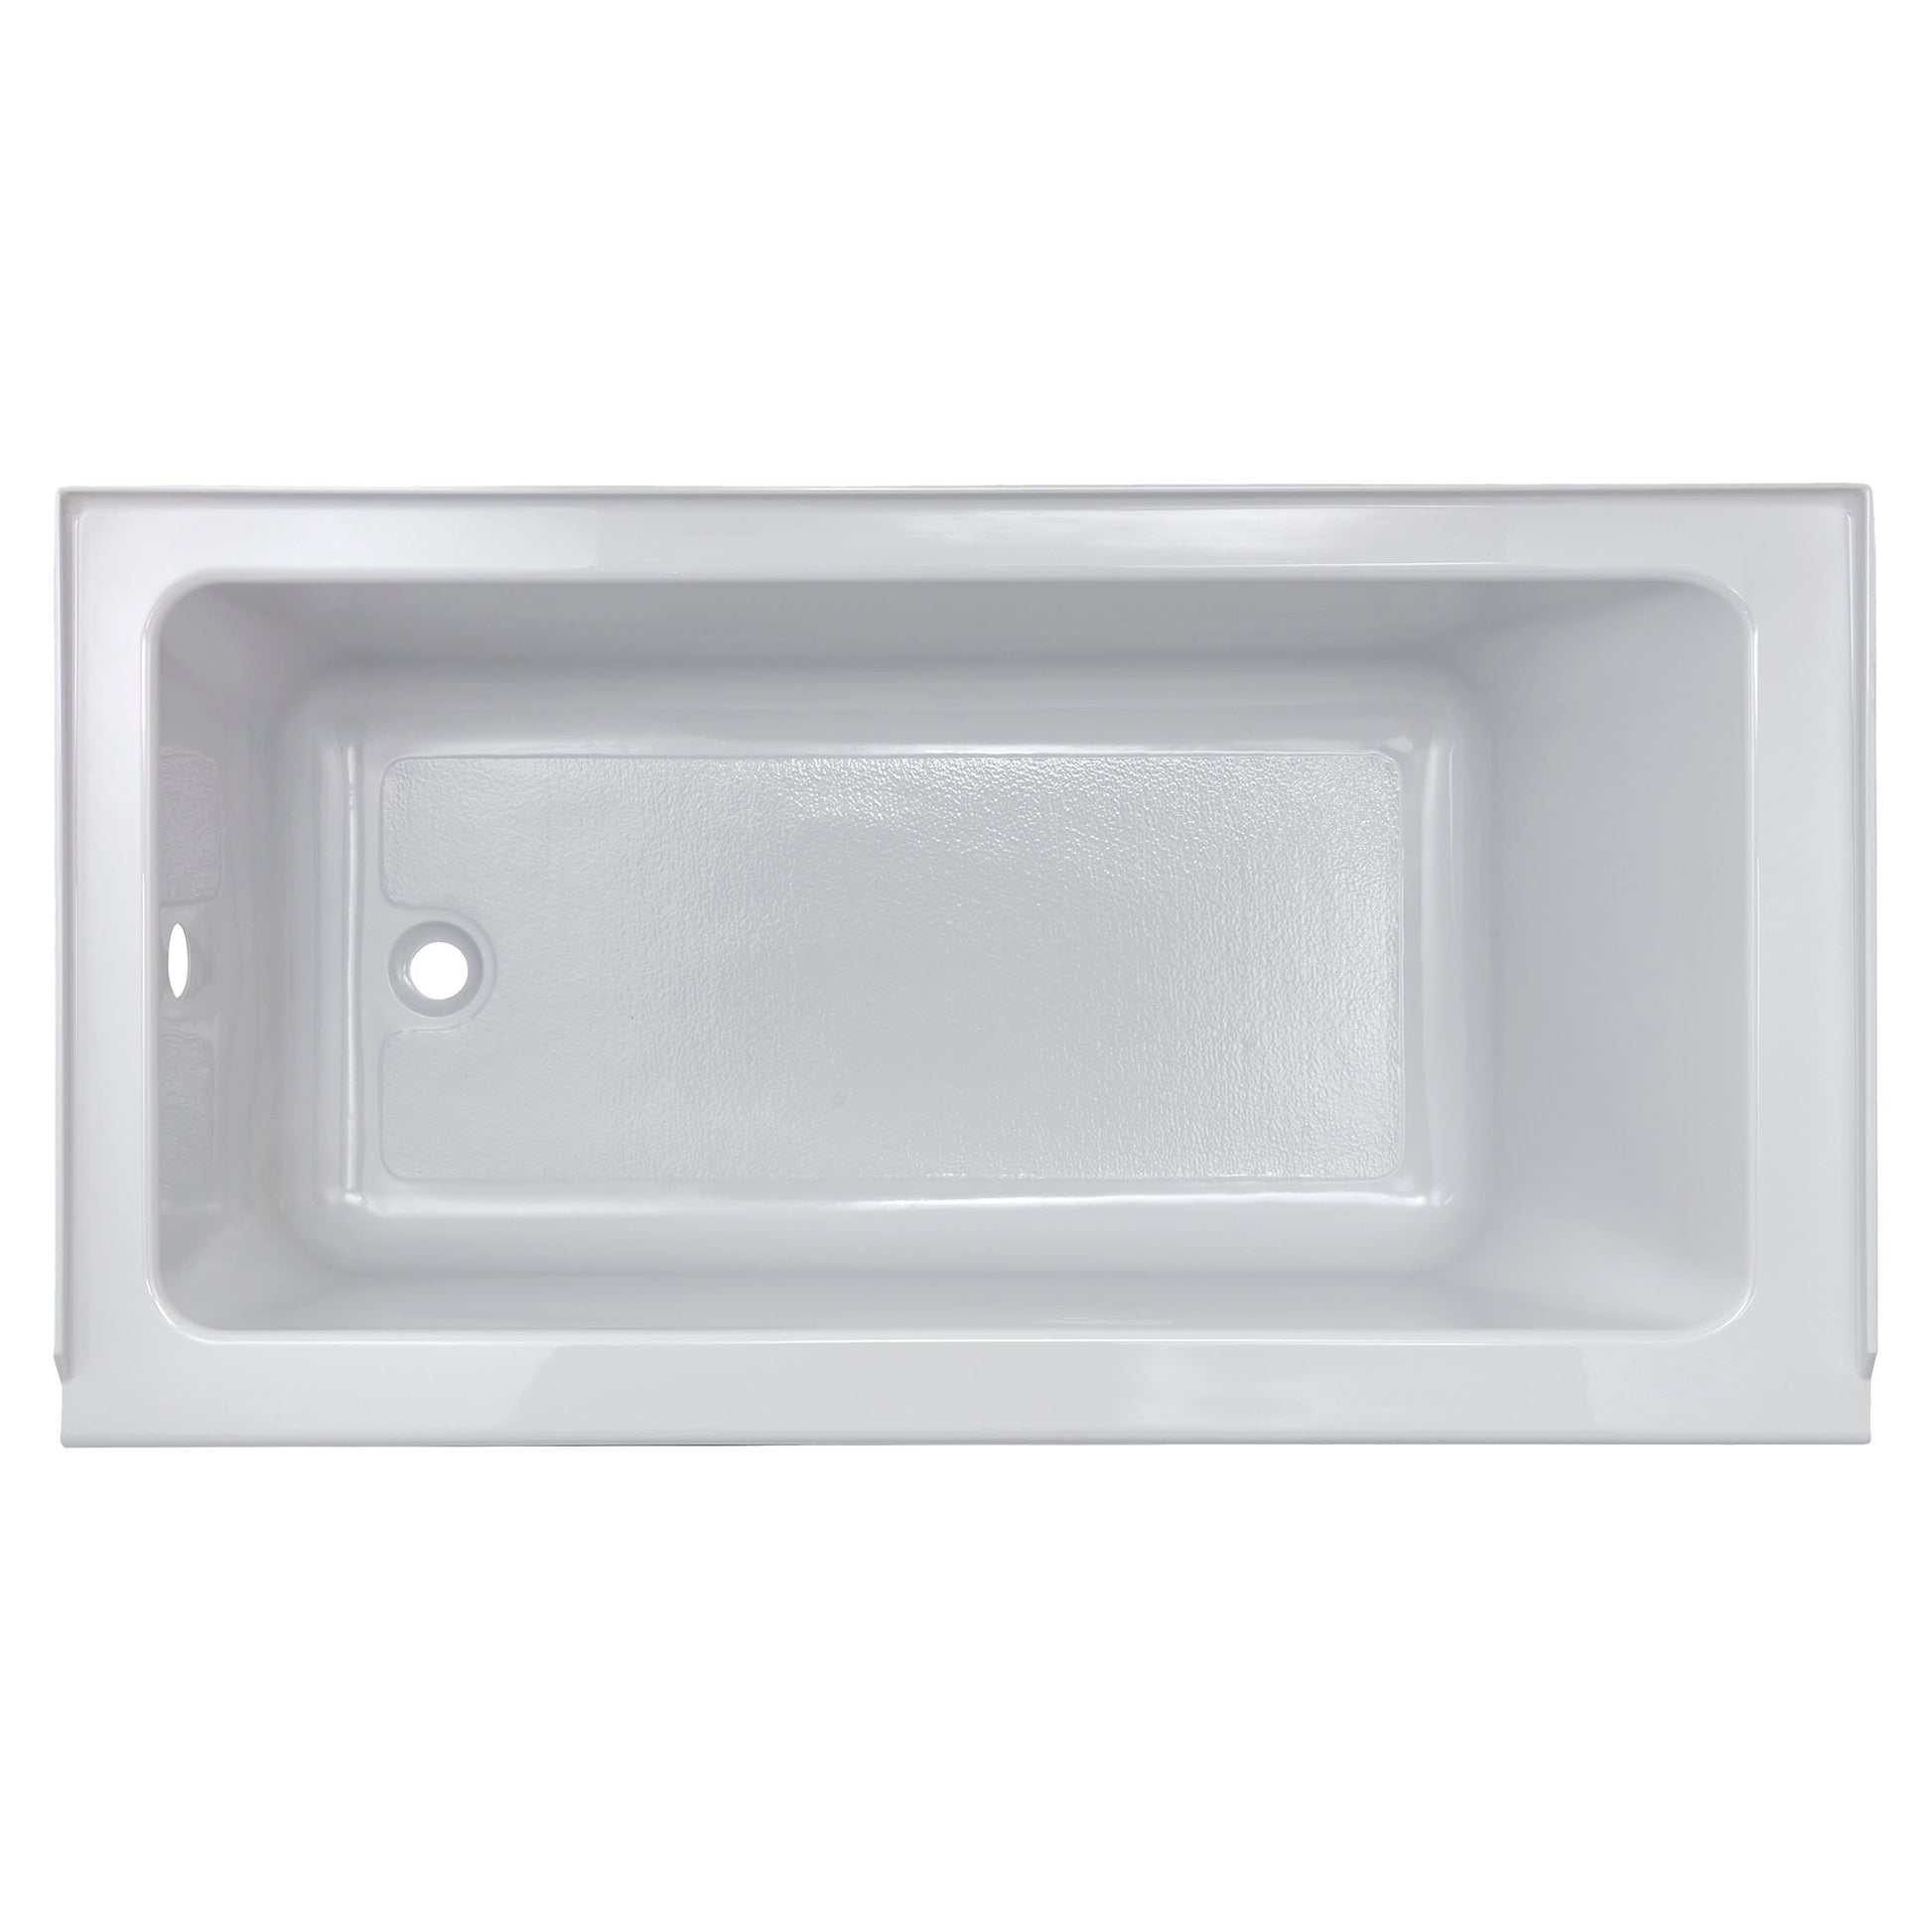 AMERICAN-STANDARD 2973202.020, Studio 60 x 30-Inch Integral Apron Bathtub With Left-Hand Outlet in White